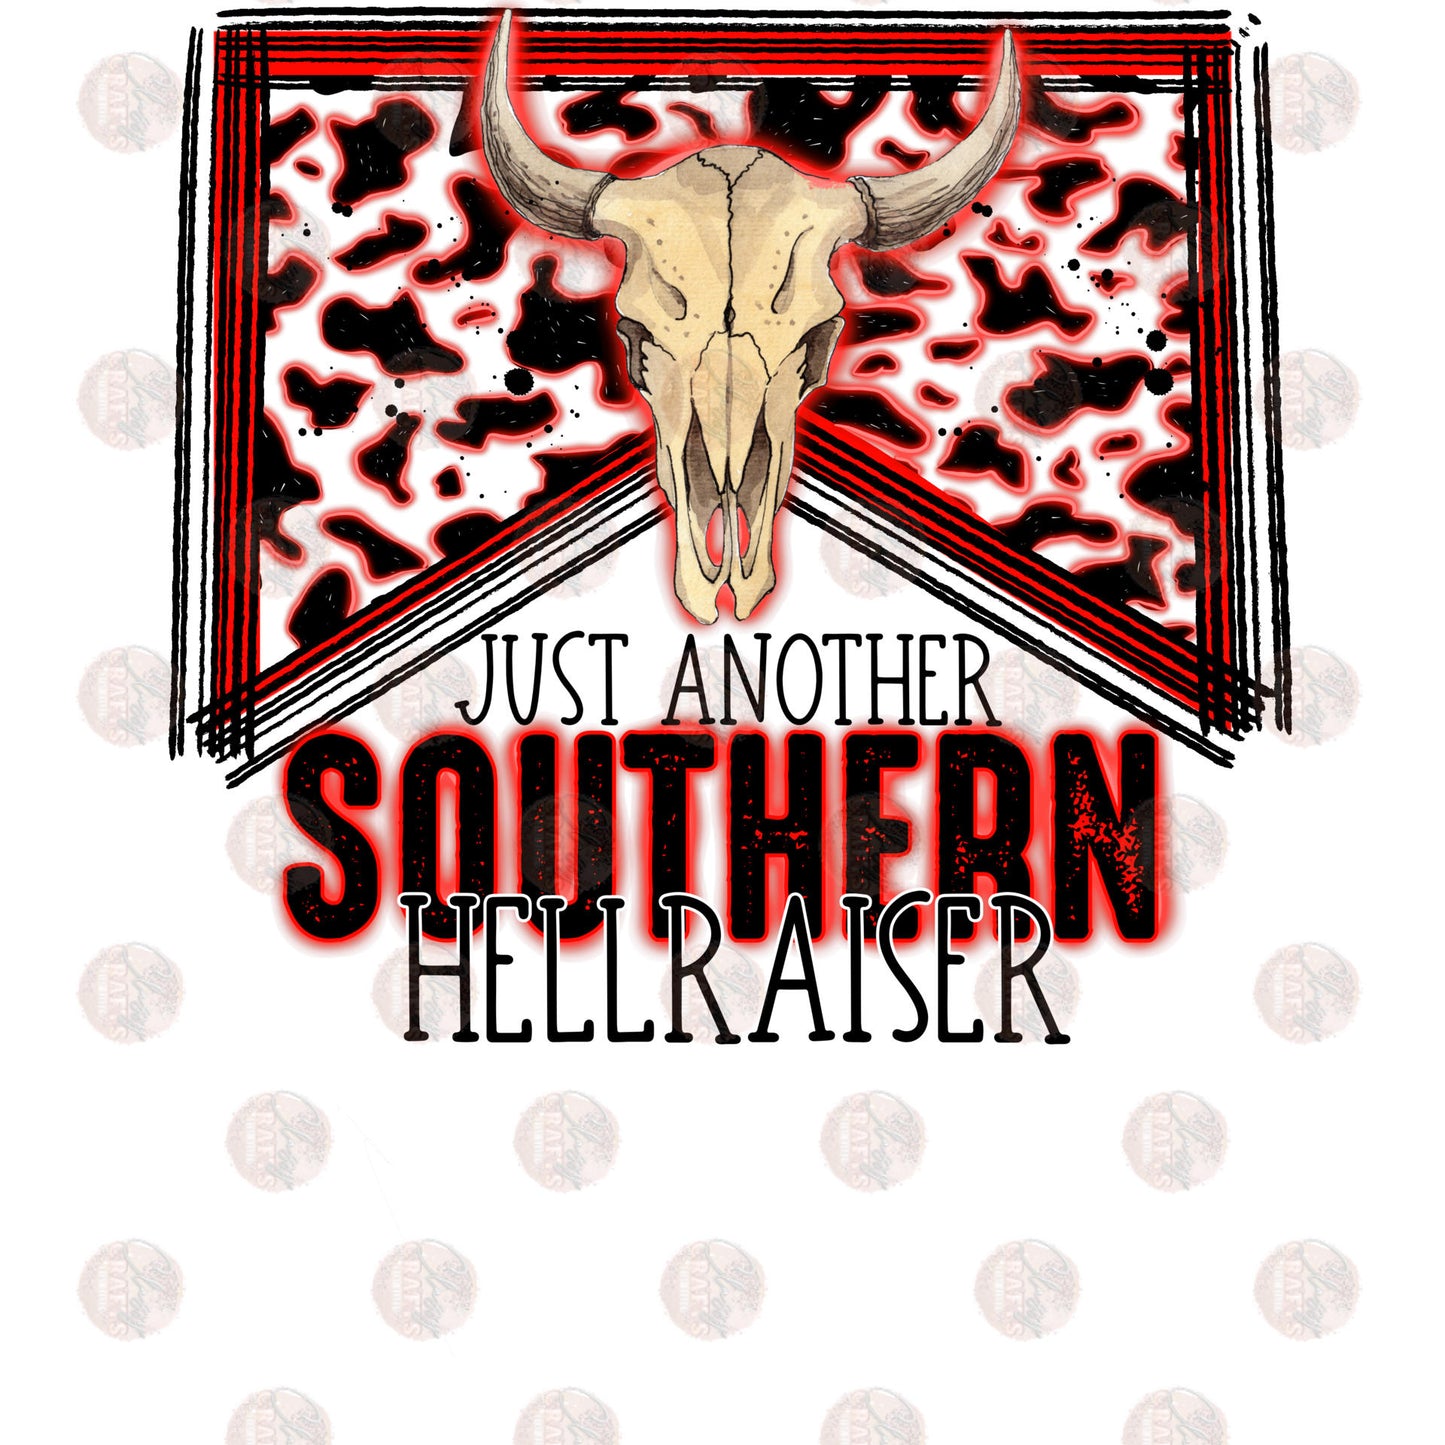 Southern Hellraiser - Sublimation Transfer